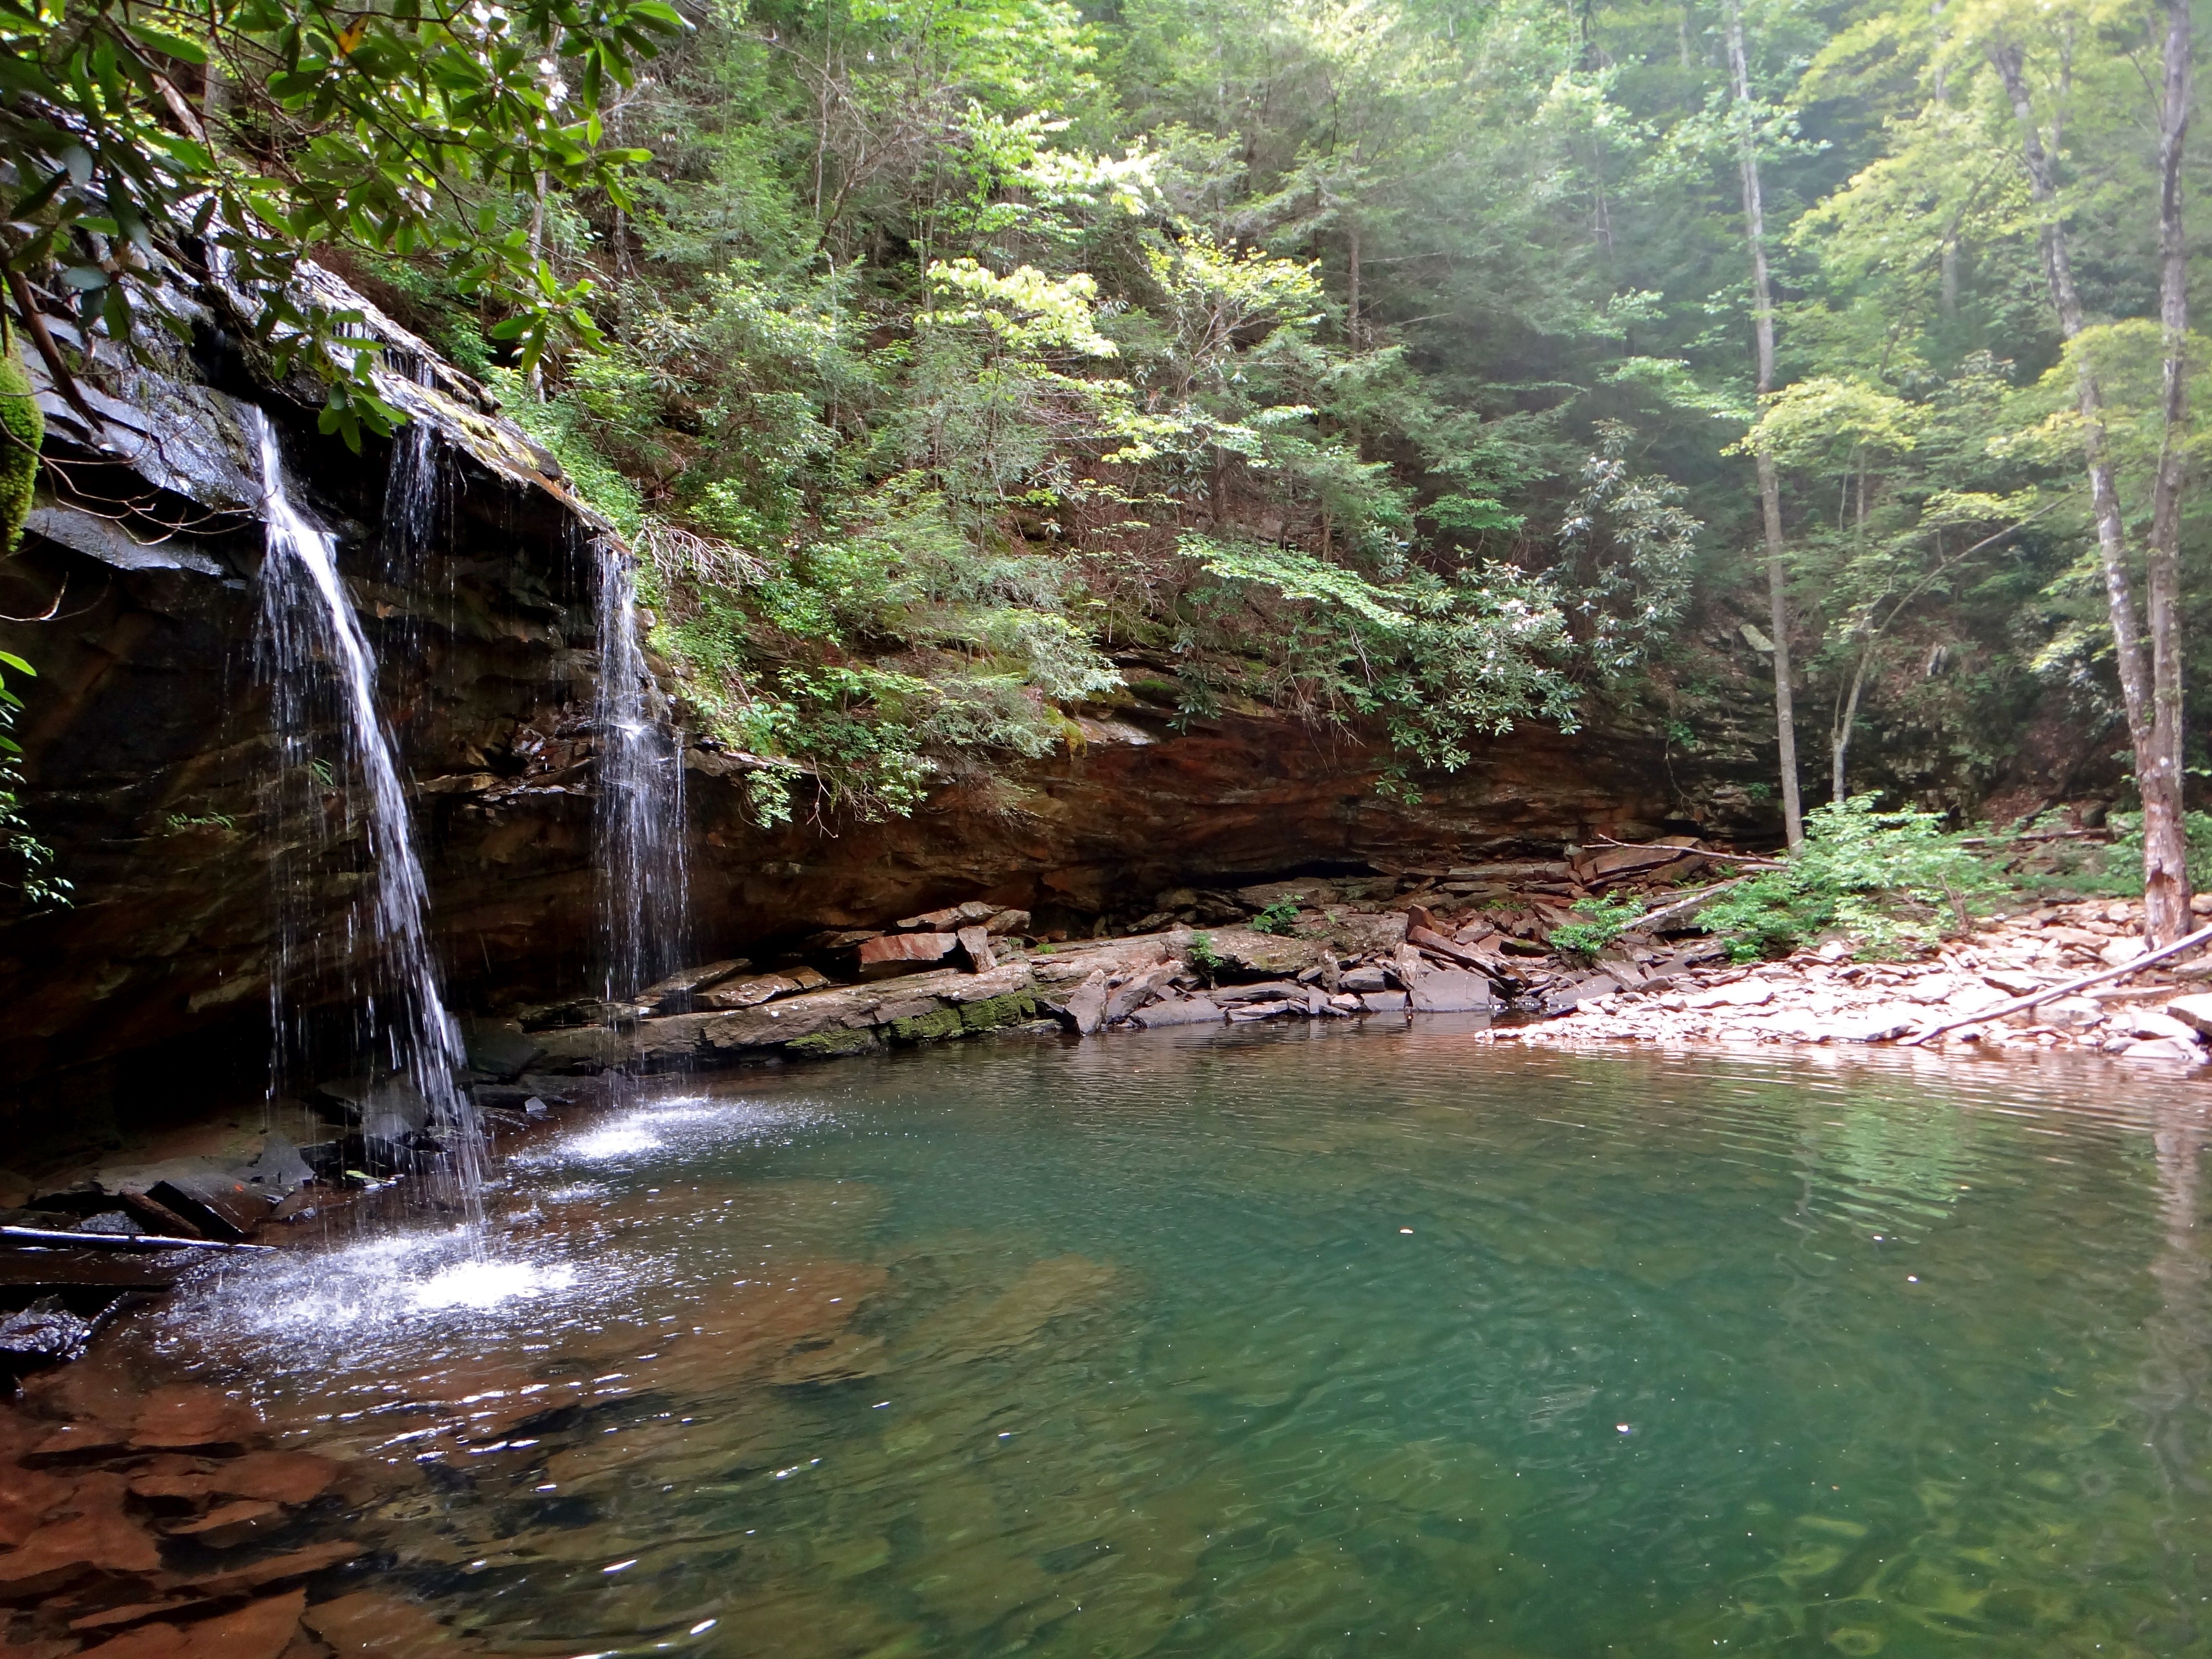 stinging fork falls - peaceful swimming hole! | Things I Will See ...